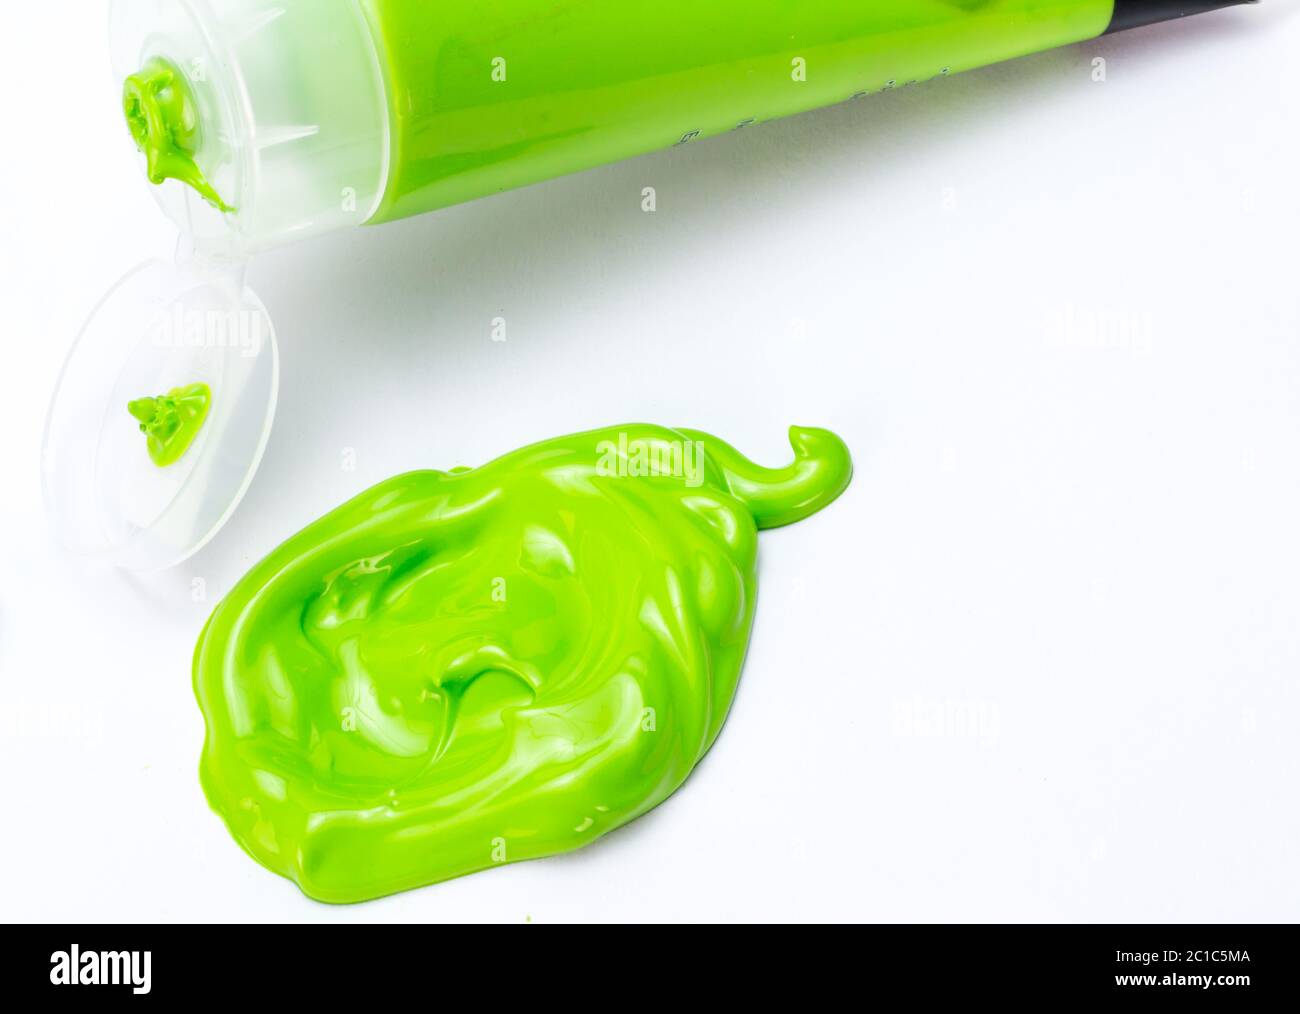 Green paint blob squeezed from art paint tube onto white paper background Stock Photo